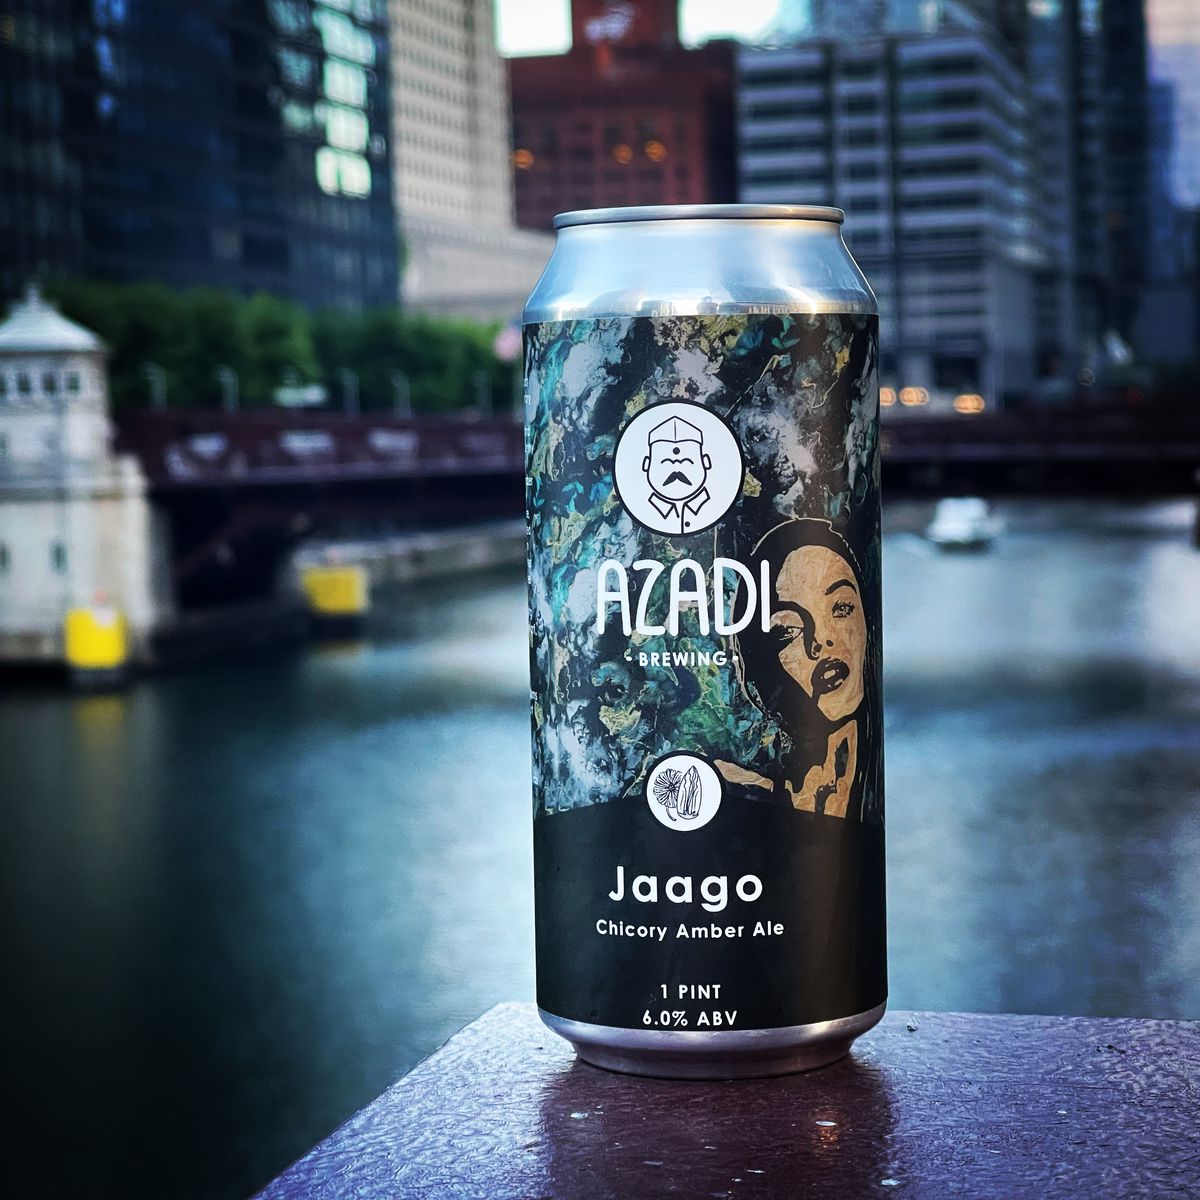 A talboy beer can with the Chicago River in the background.